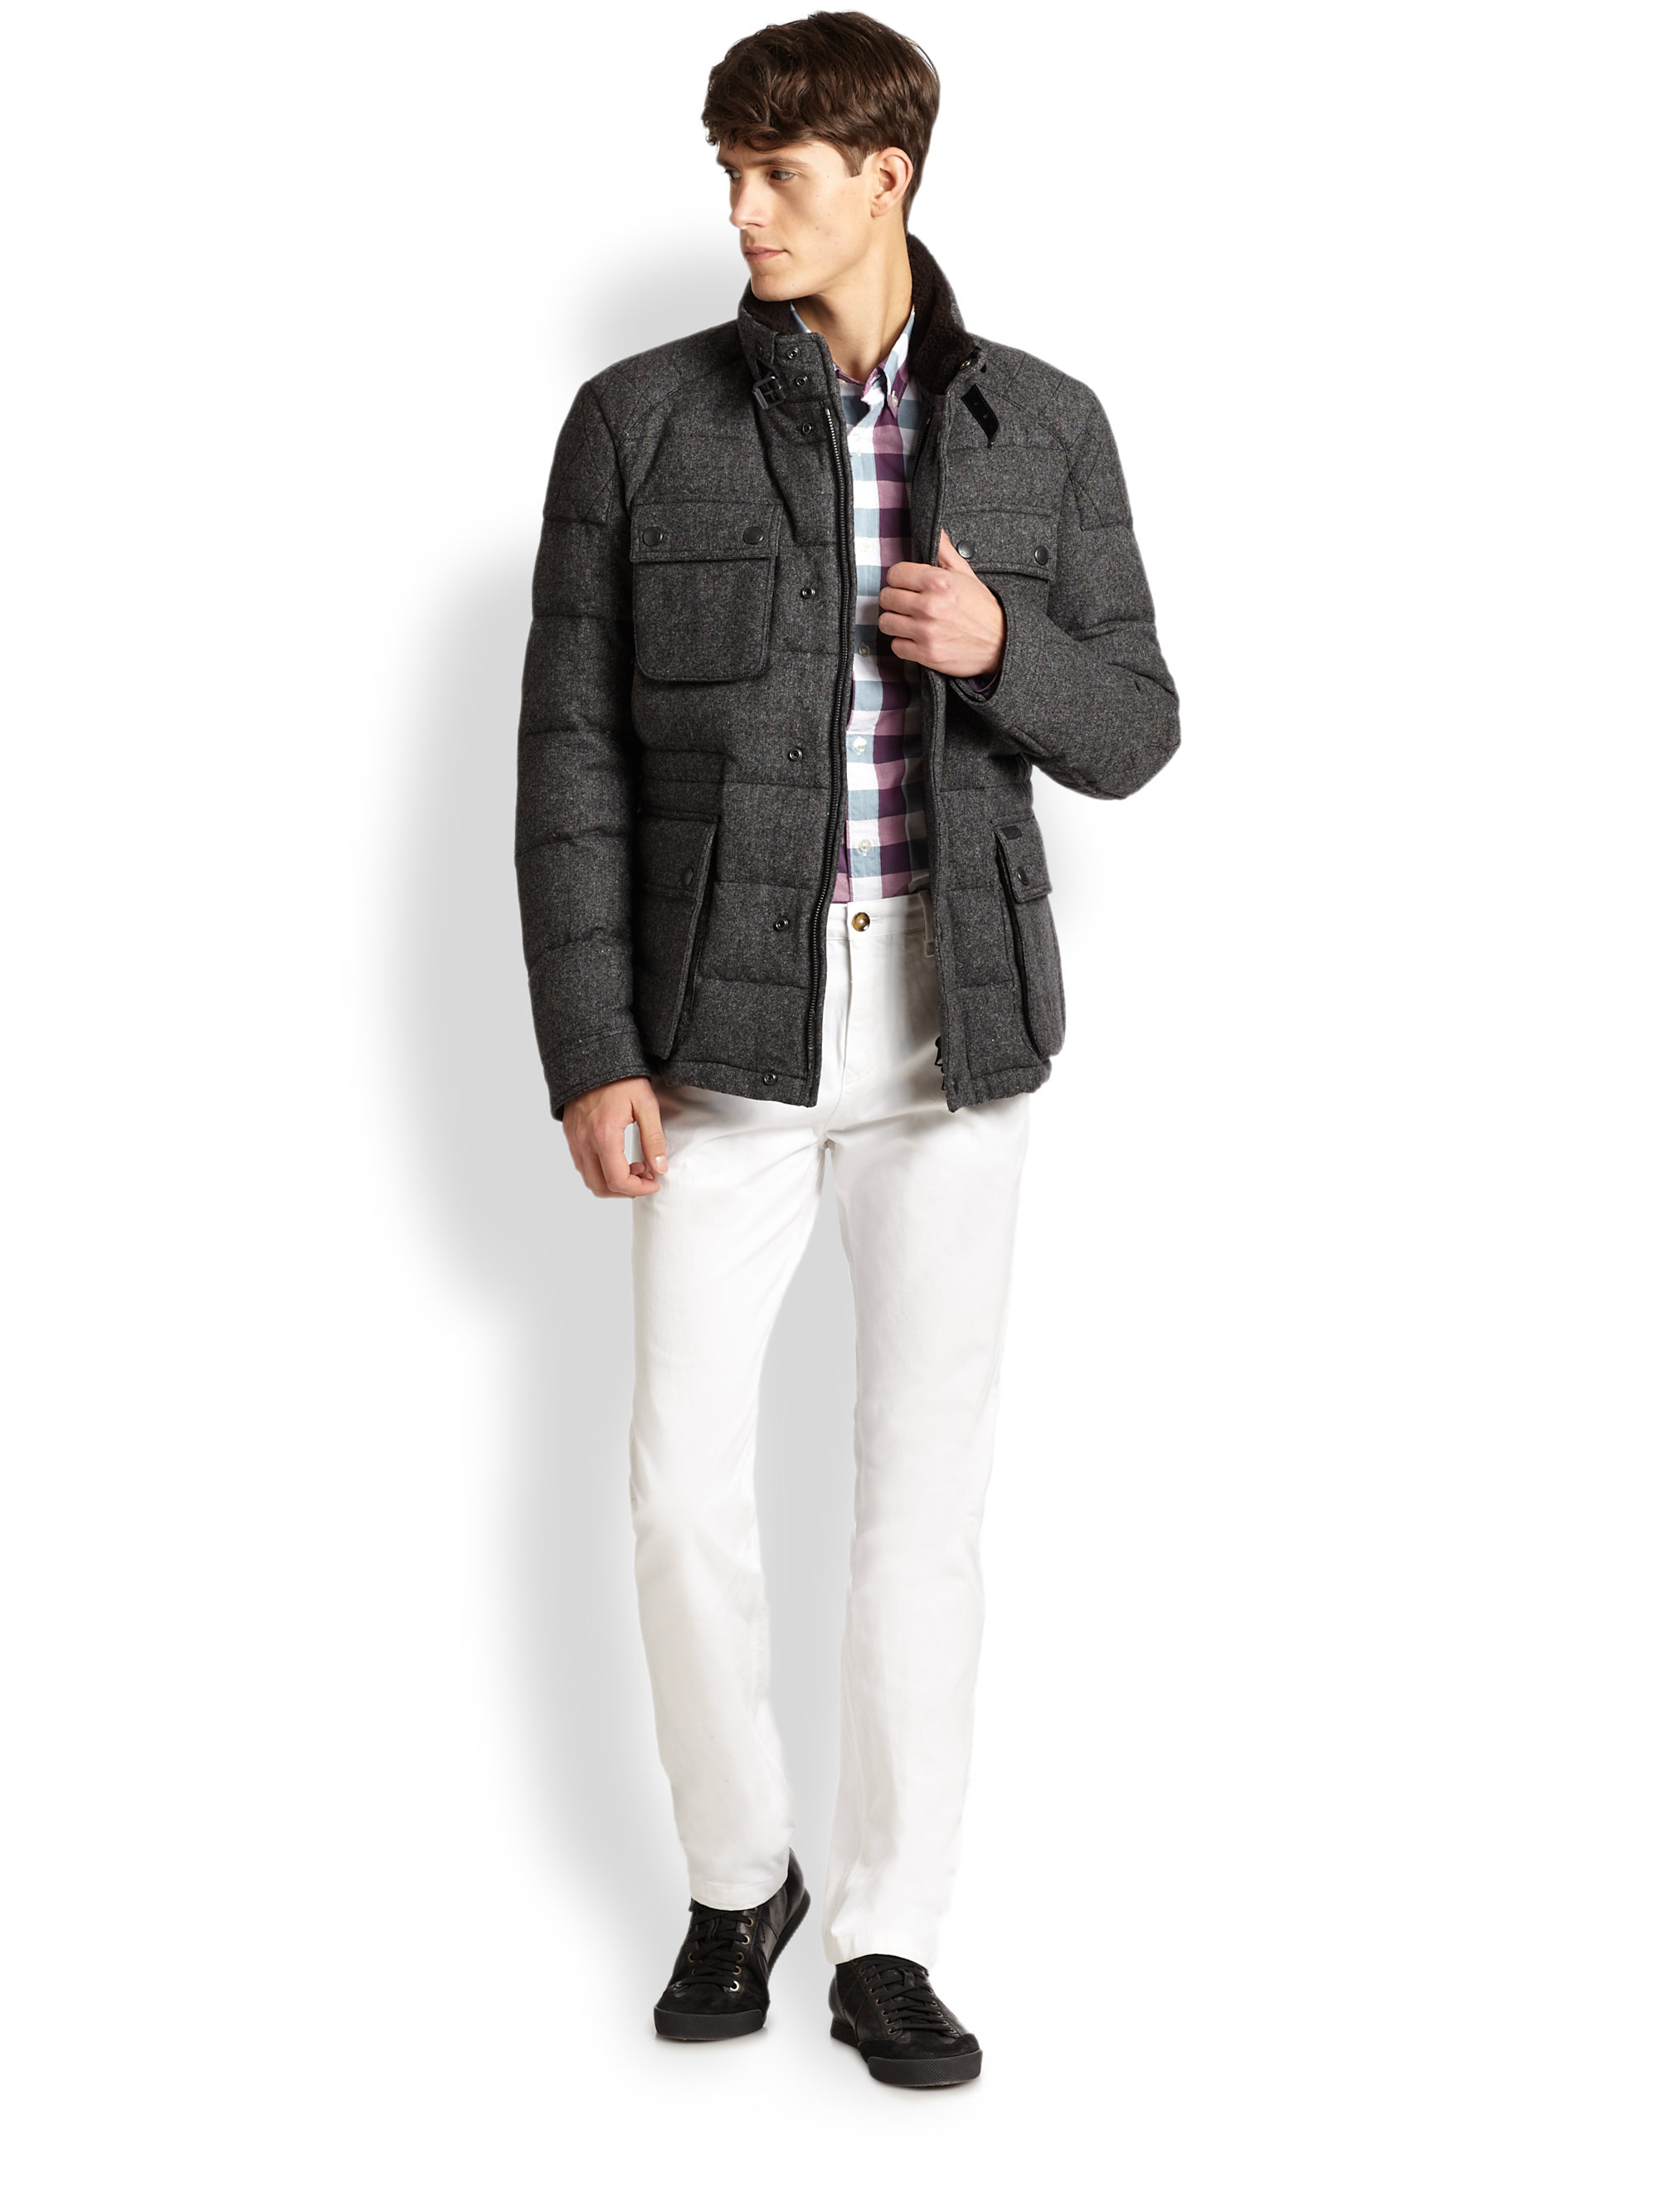 Lyst - Burberry Brit Yarwood Field Jacket in Gray for Men